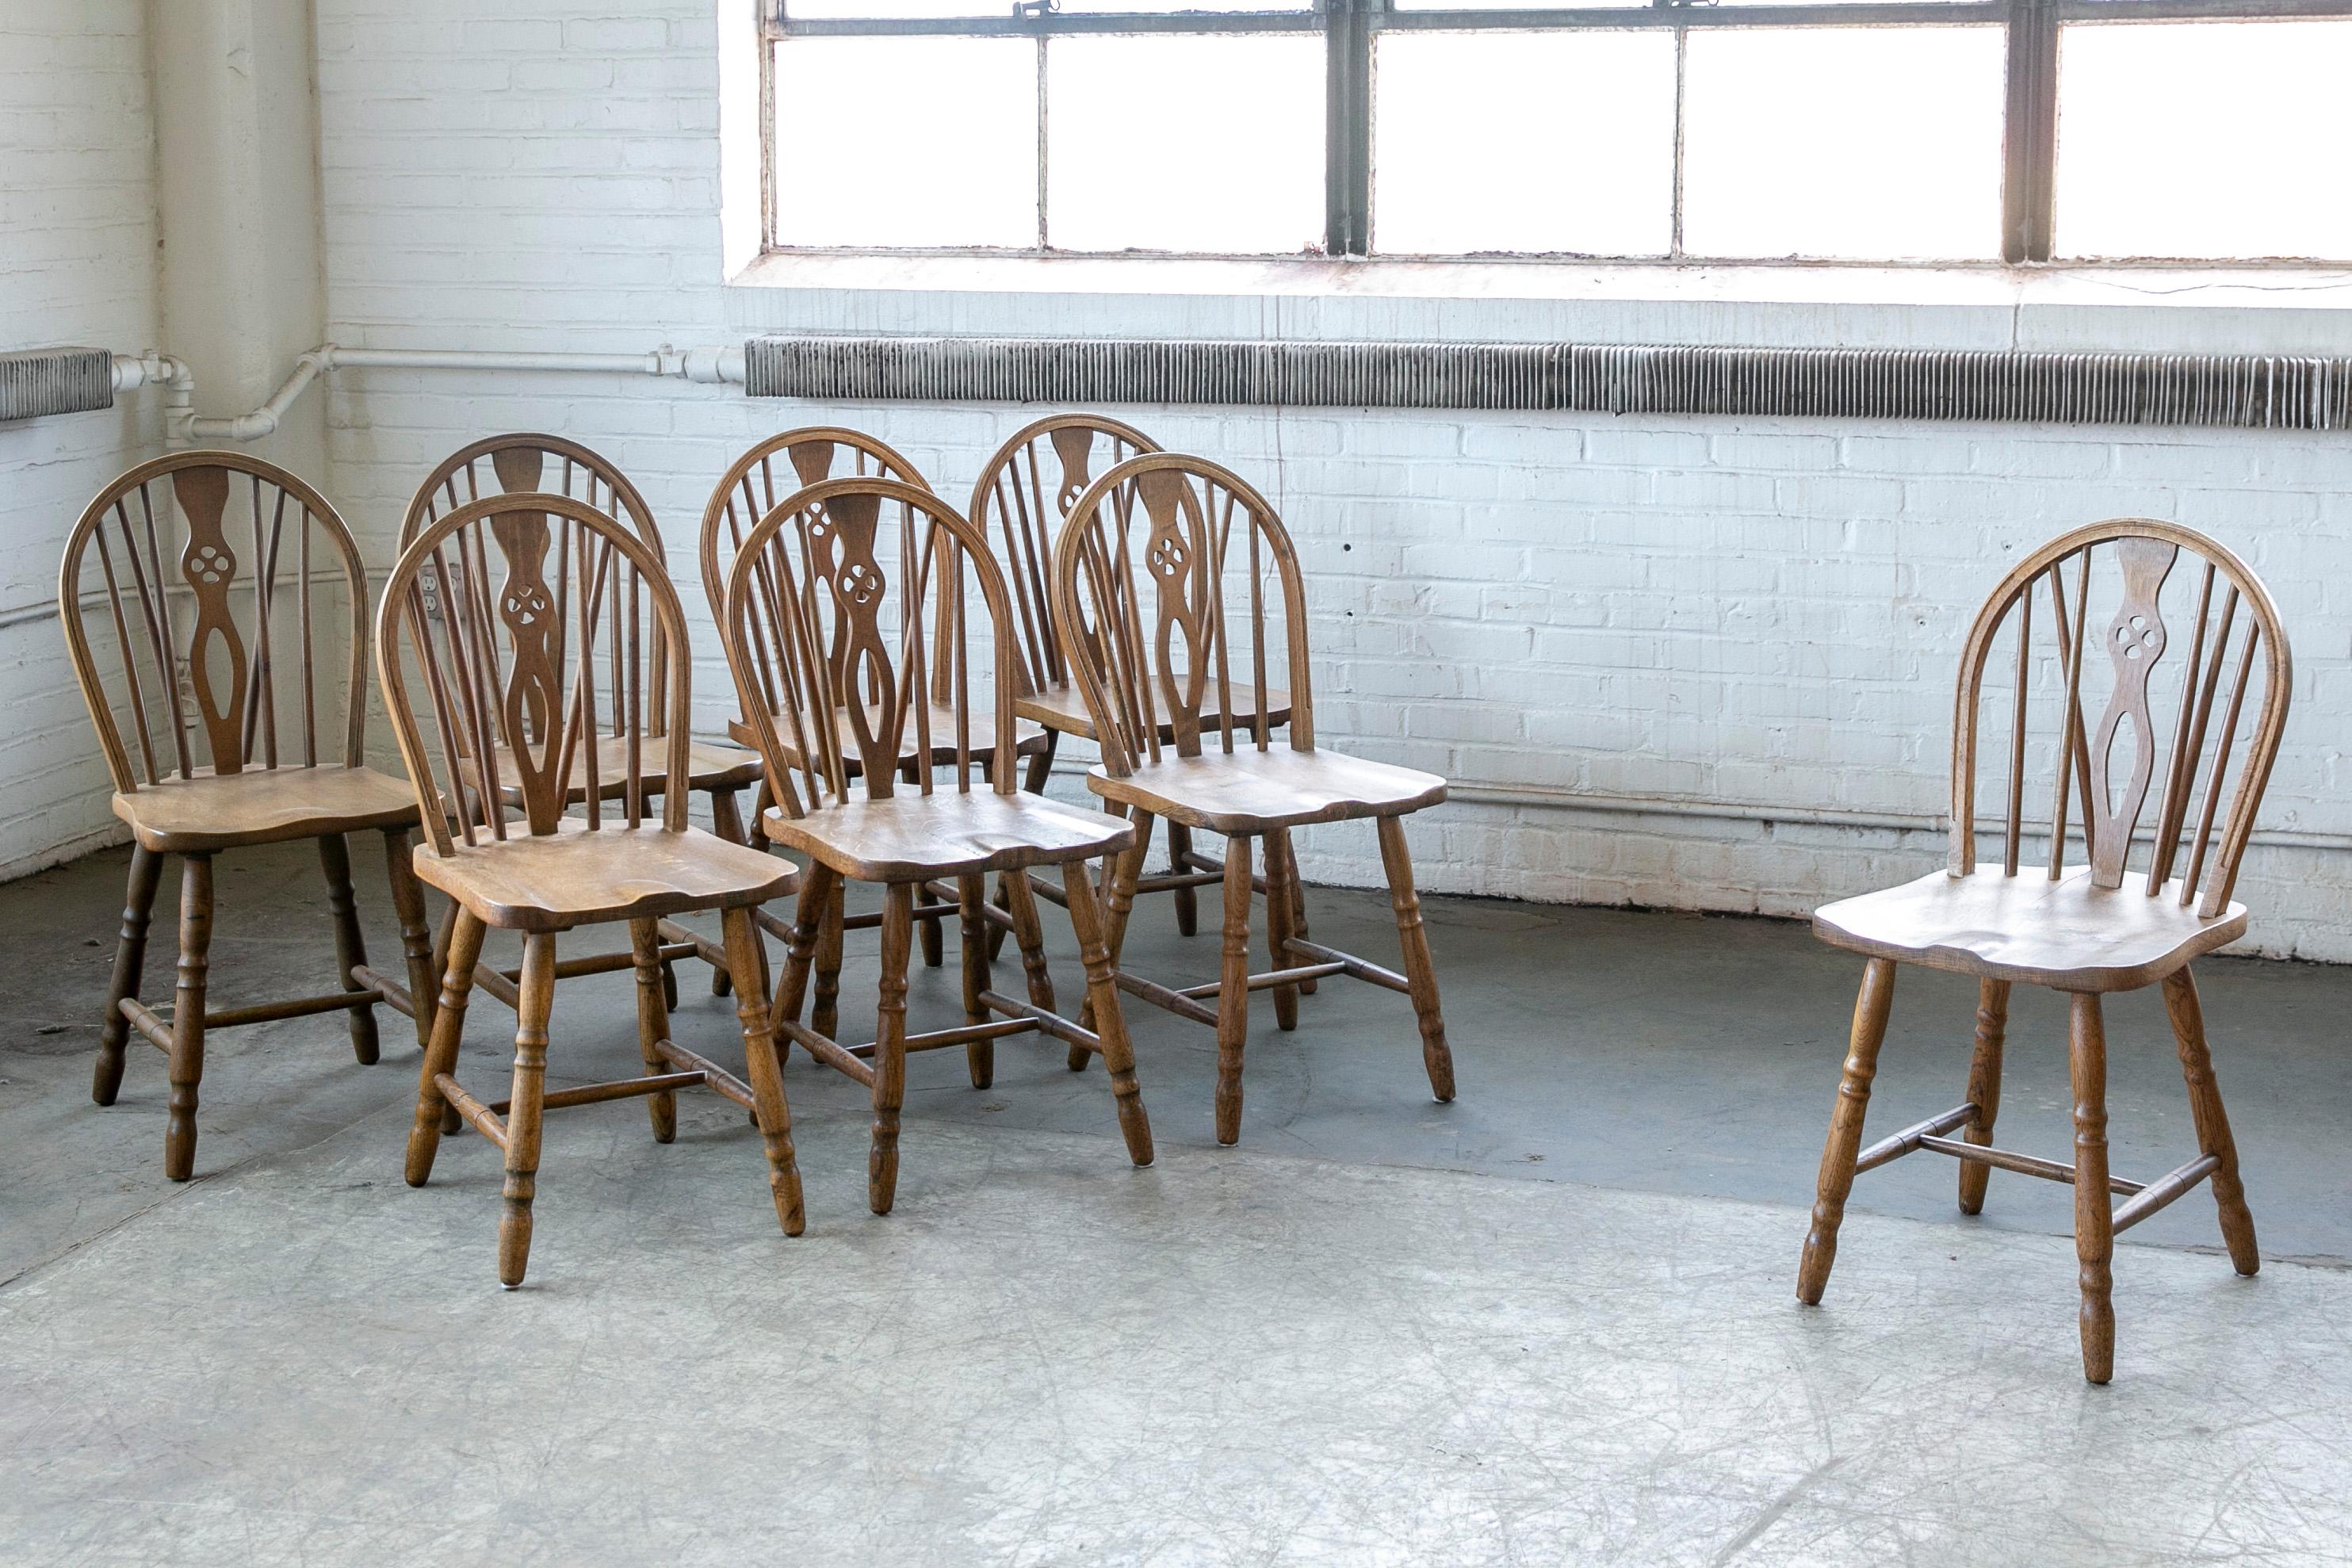 Great set of eight Danish dining or kitchen chairs in traditional Windsor style with slat backs and saddle-style seating. All 8 are side chairs. Made from dark stained oak wood probably sometime between 1900 and 1950 in Denmark based on wood type,